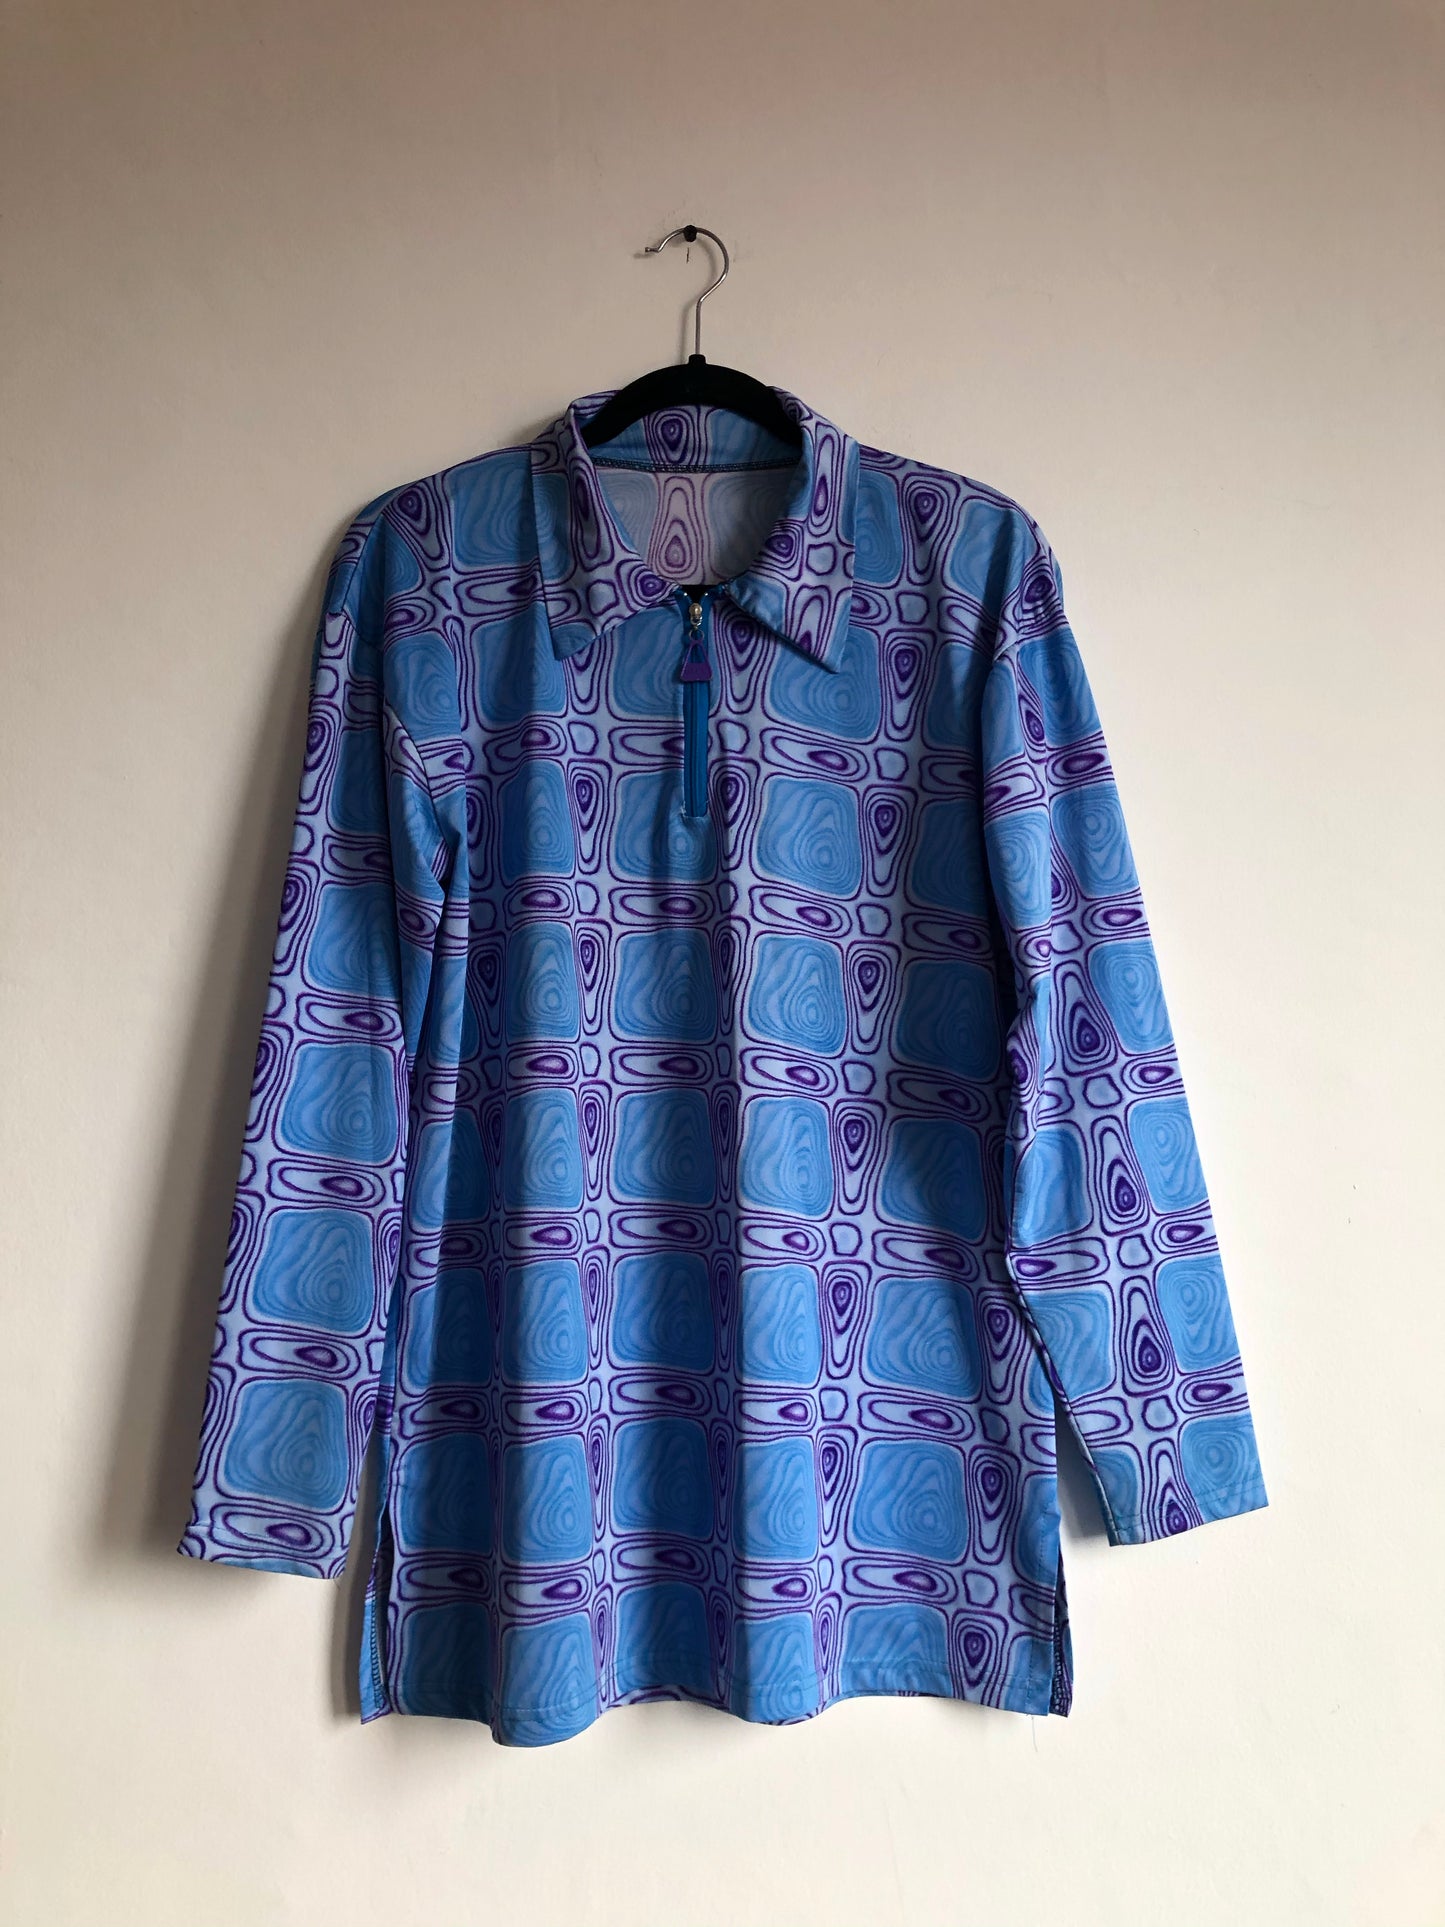 Psychedelic Seventies Blouse